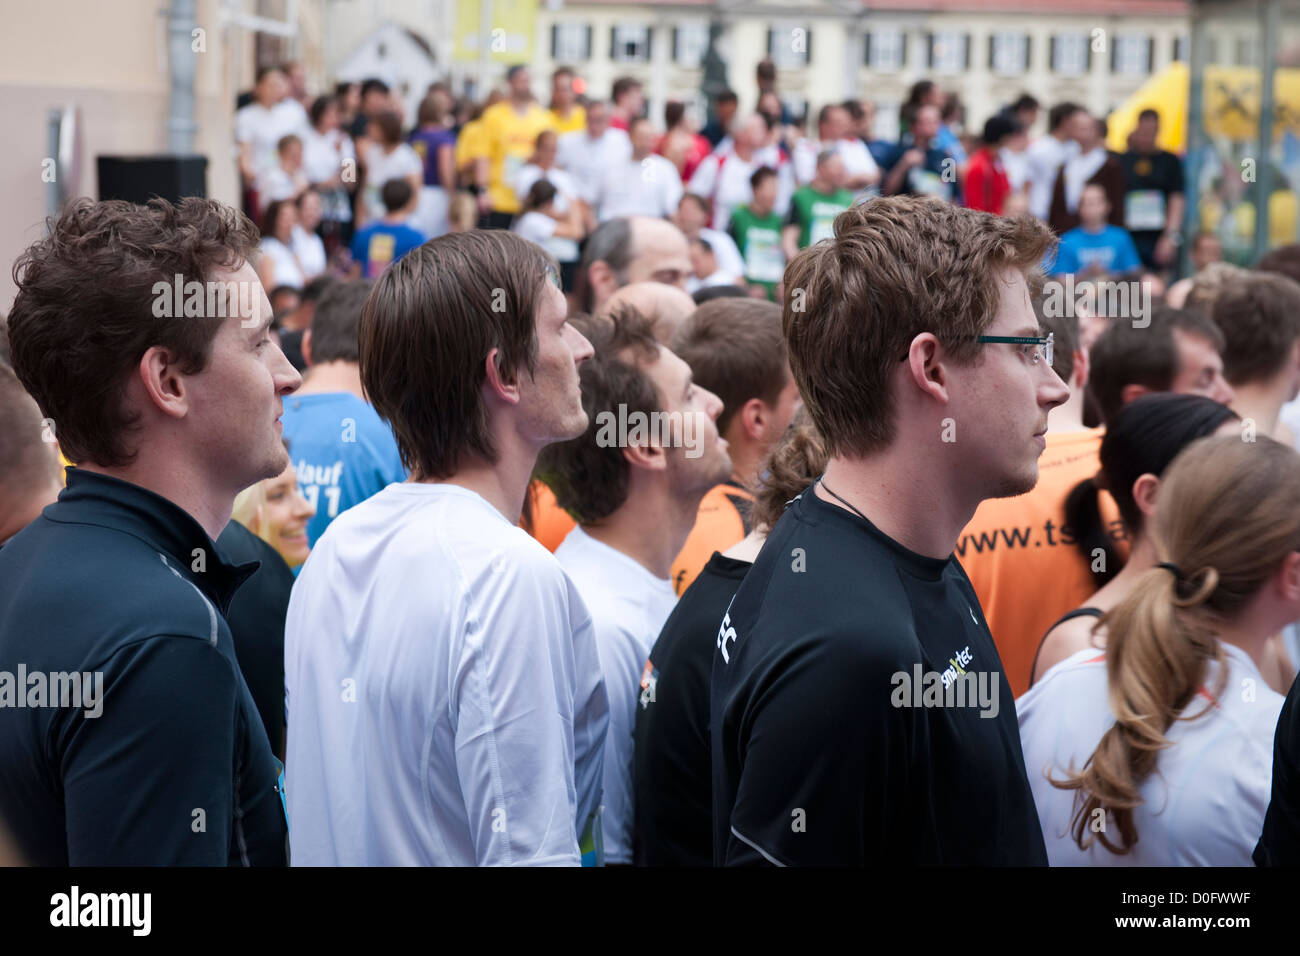 Competitors mill about at the start of a fun run in Graz, Austria Stock Photo